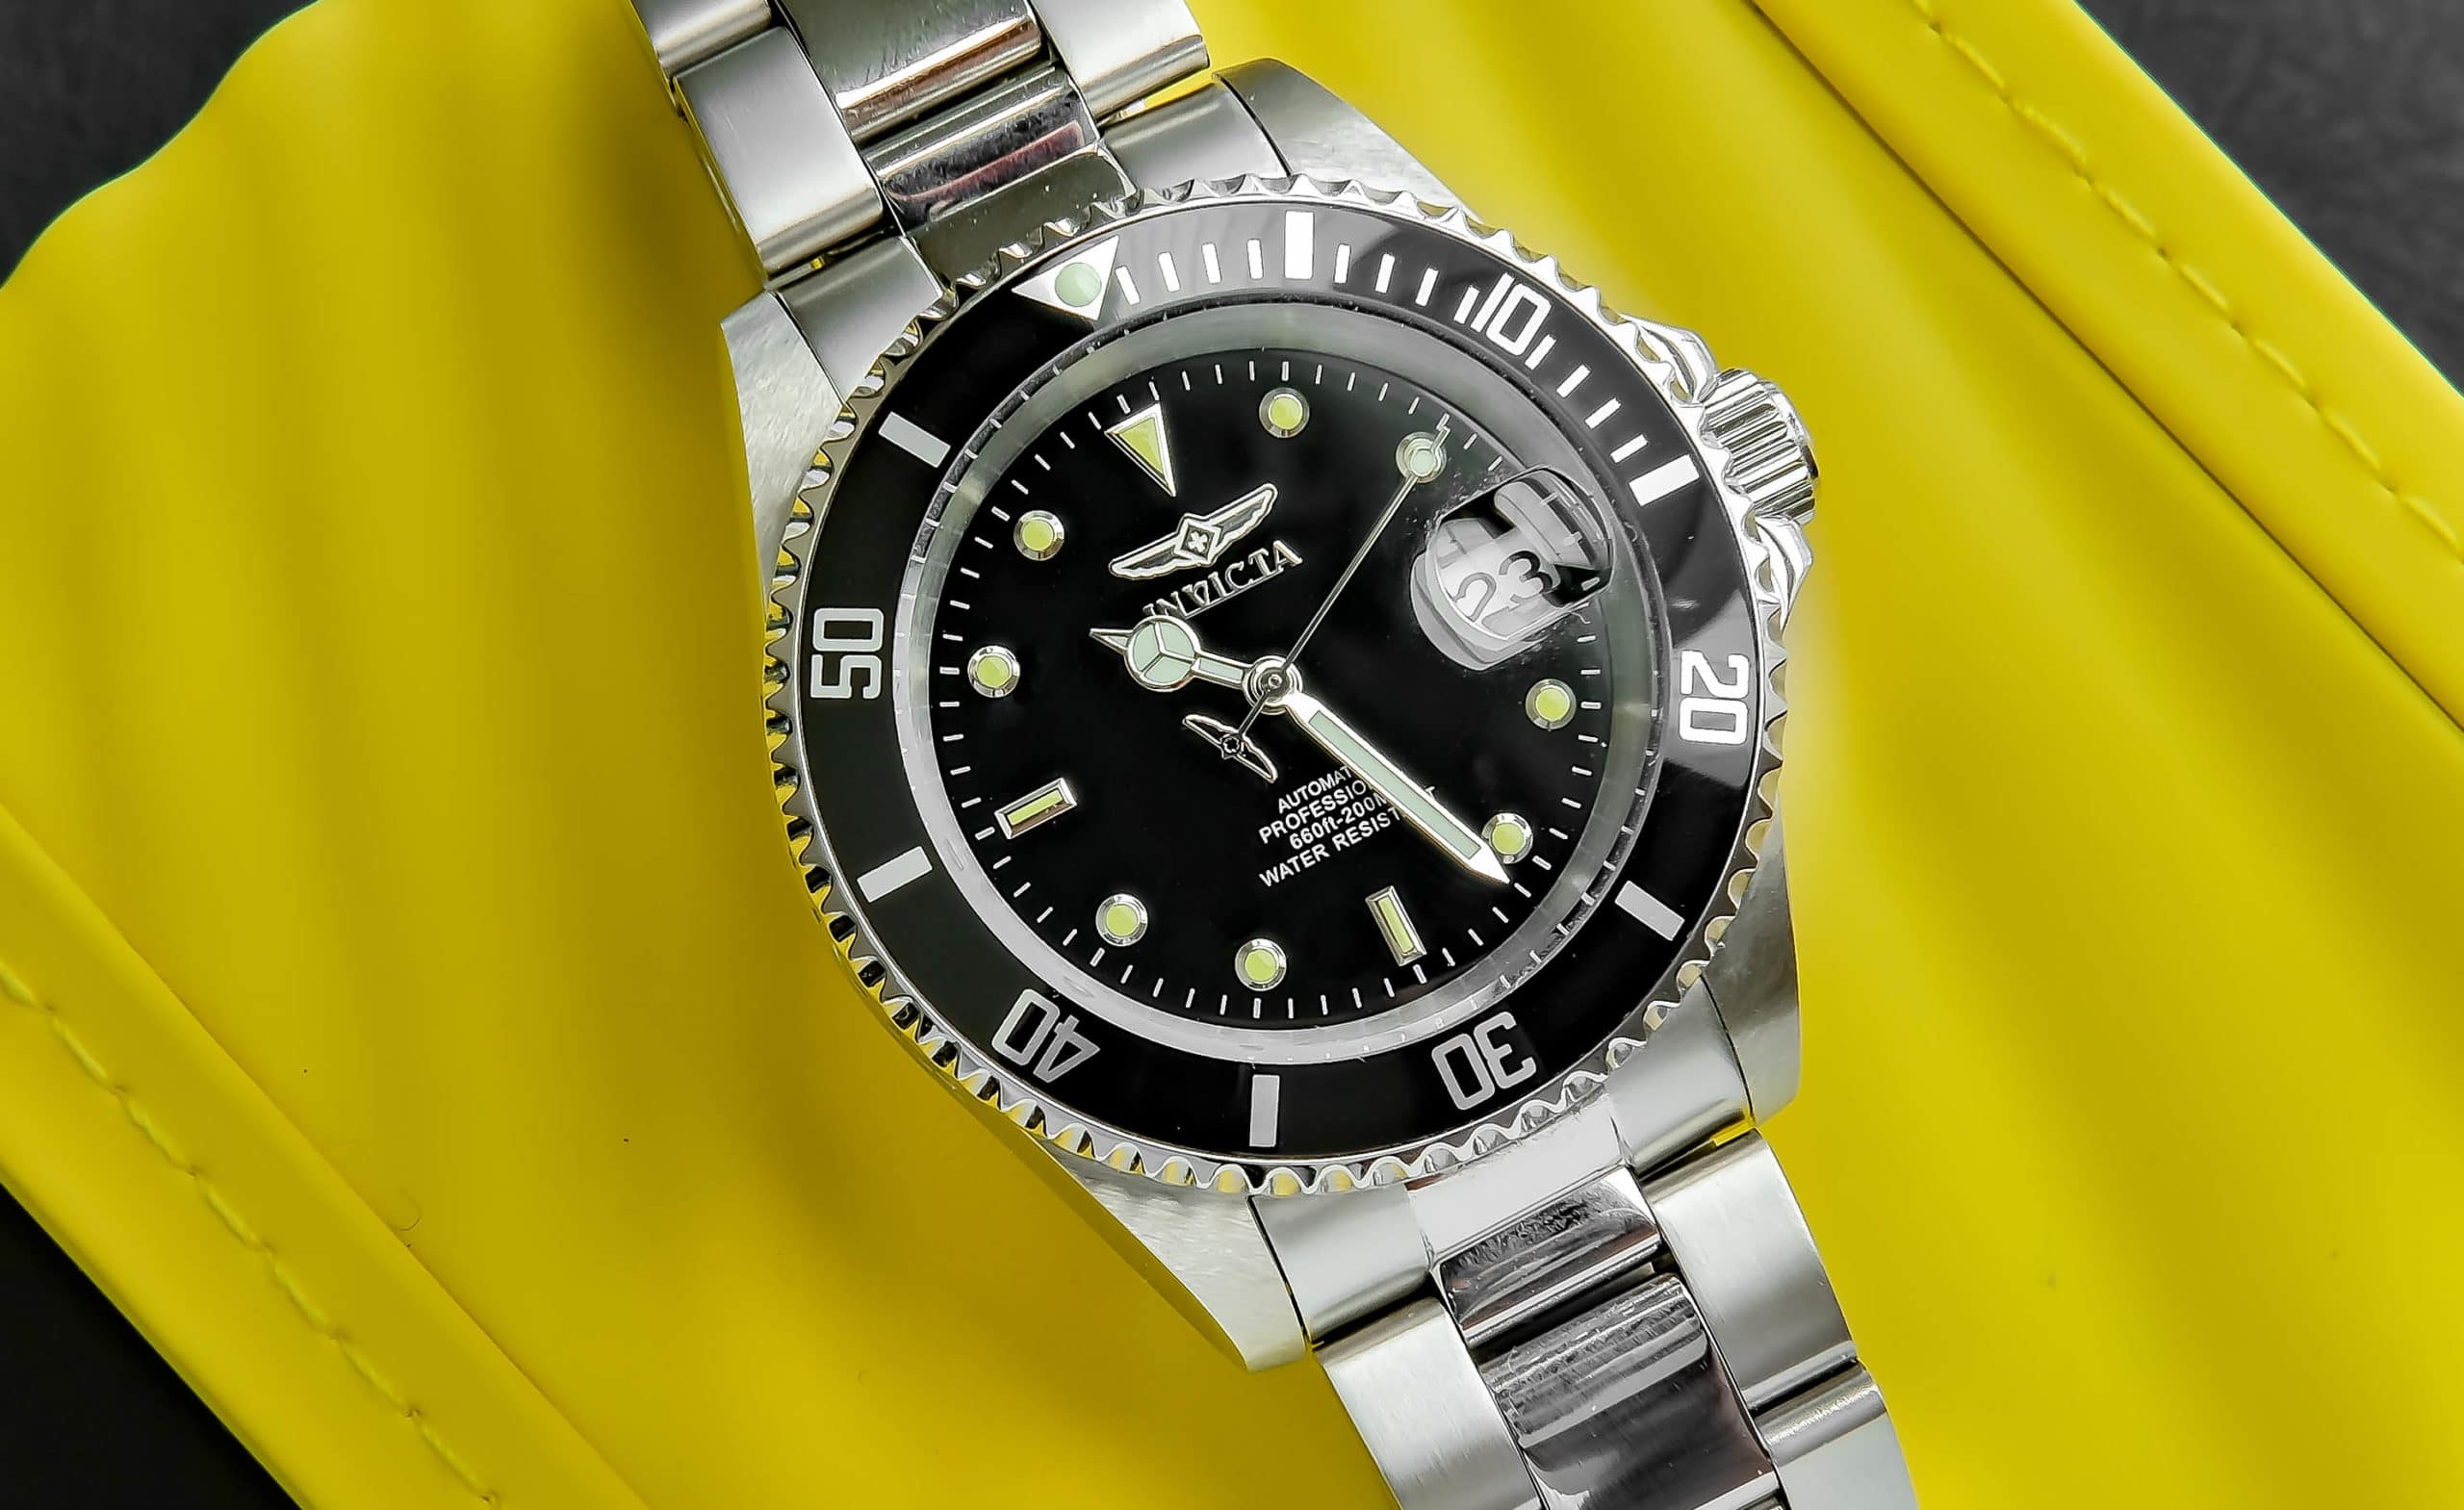 Invicta Pro Diver Review (8926OB) - All You Need To Know | Two 